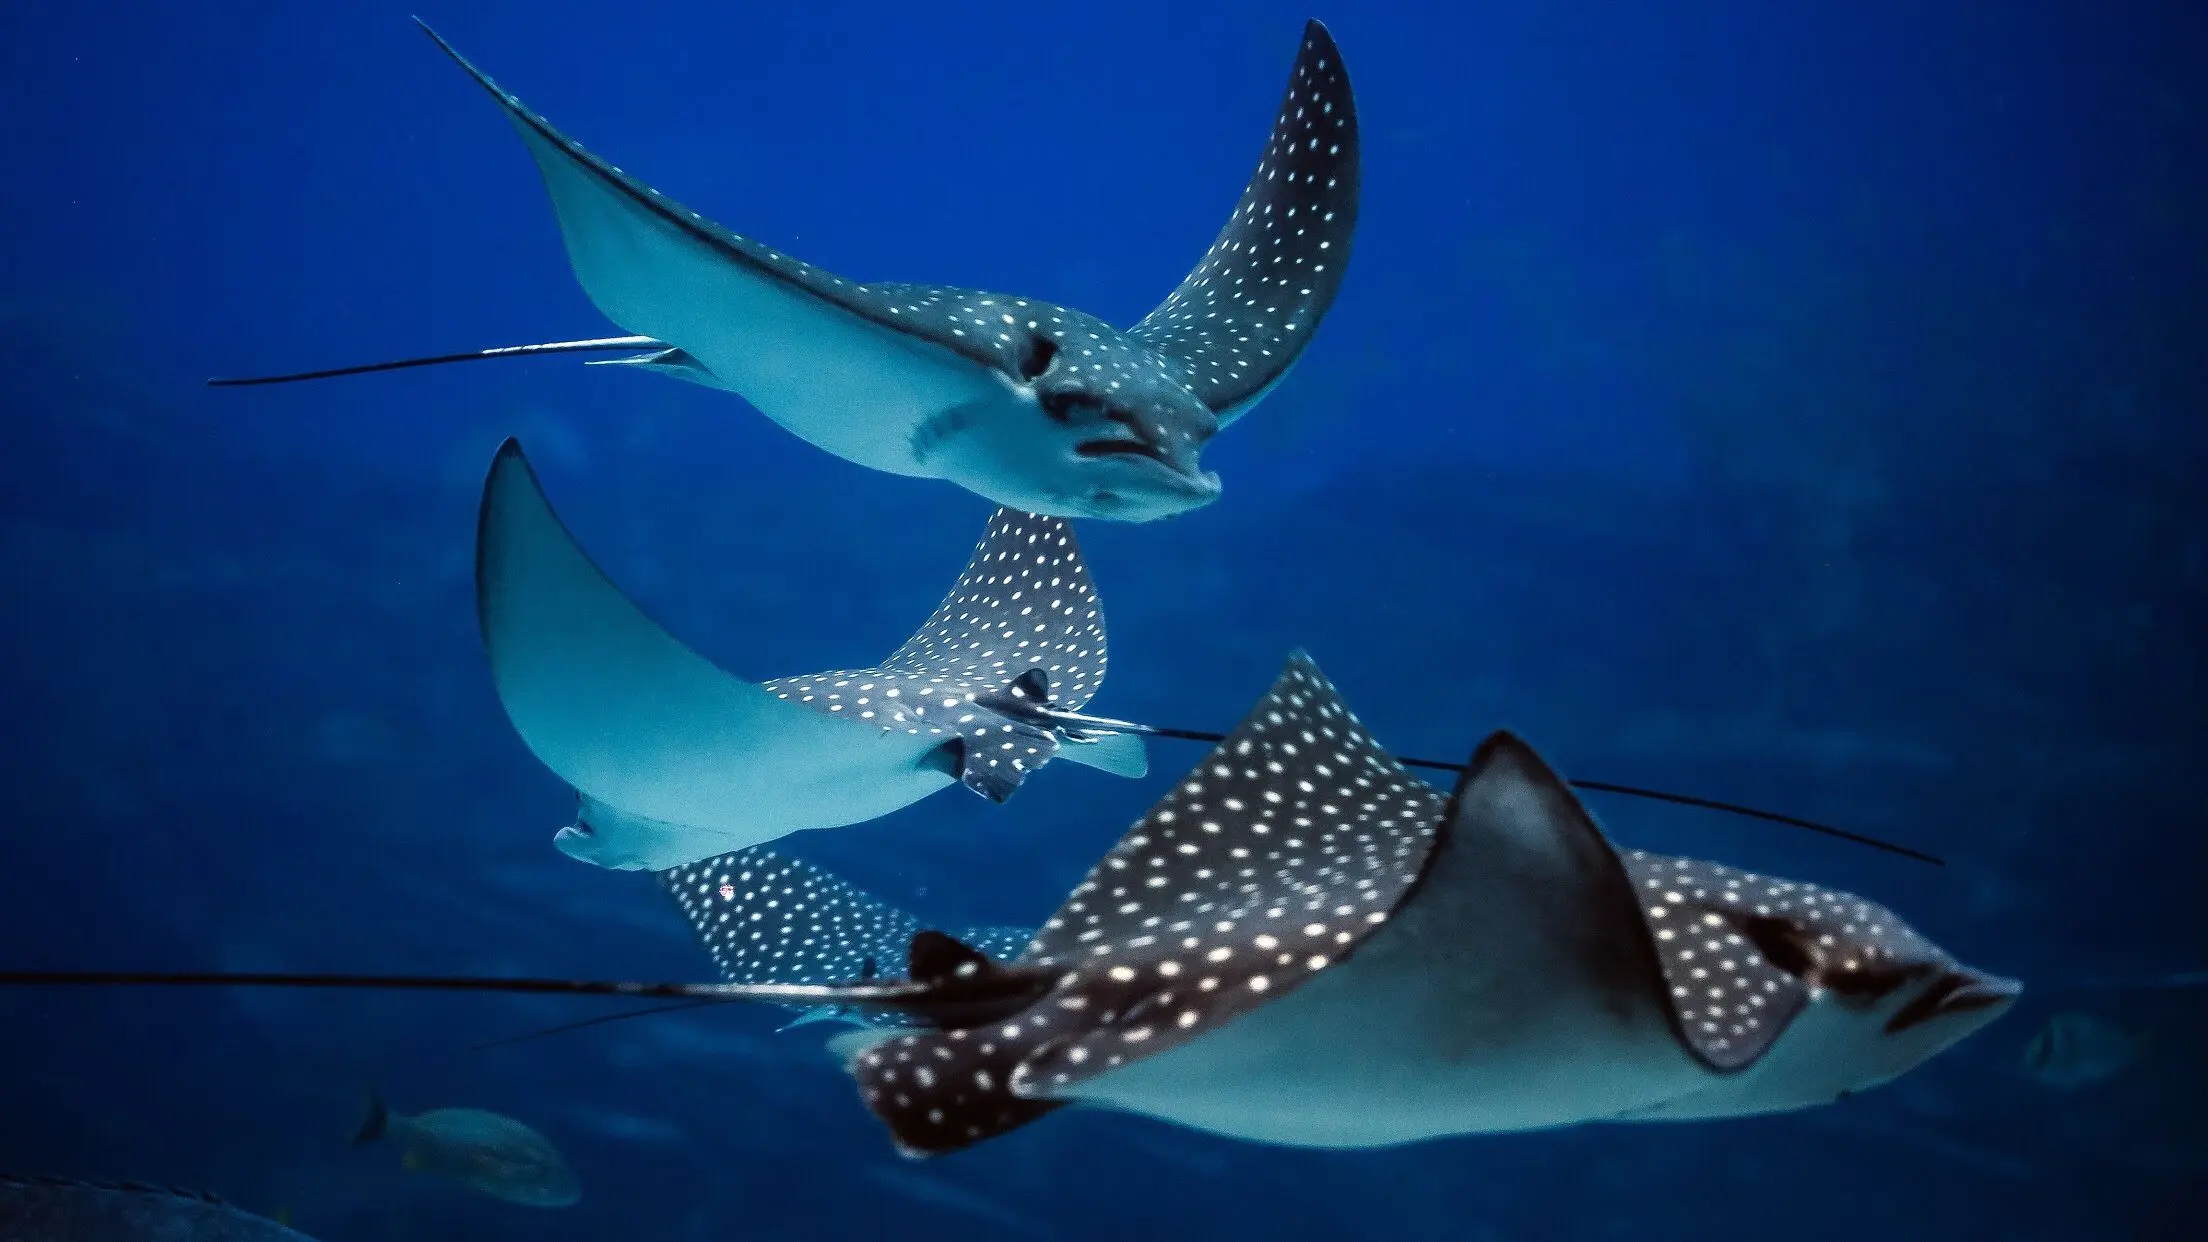 15 Stunning Facts About Stingrays